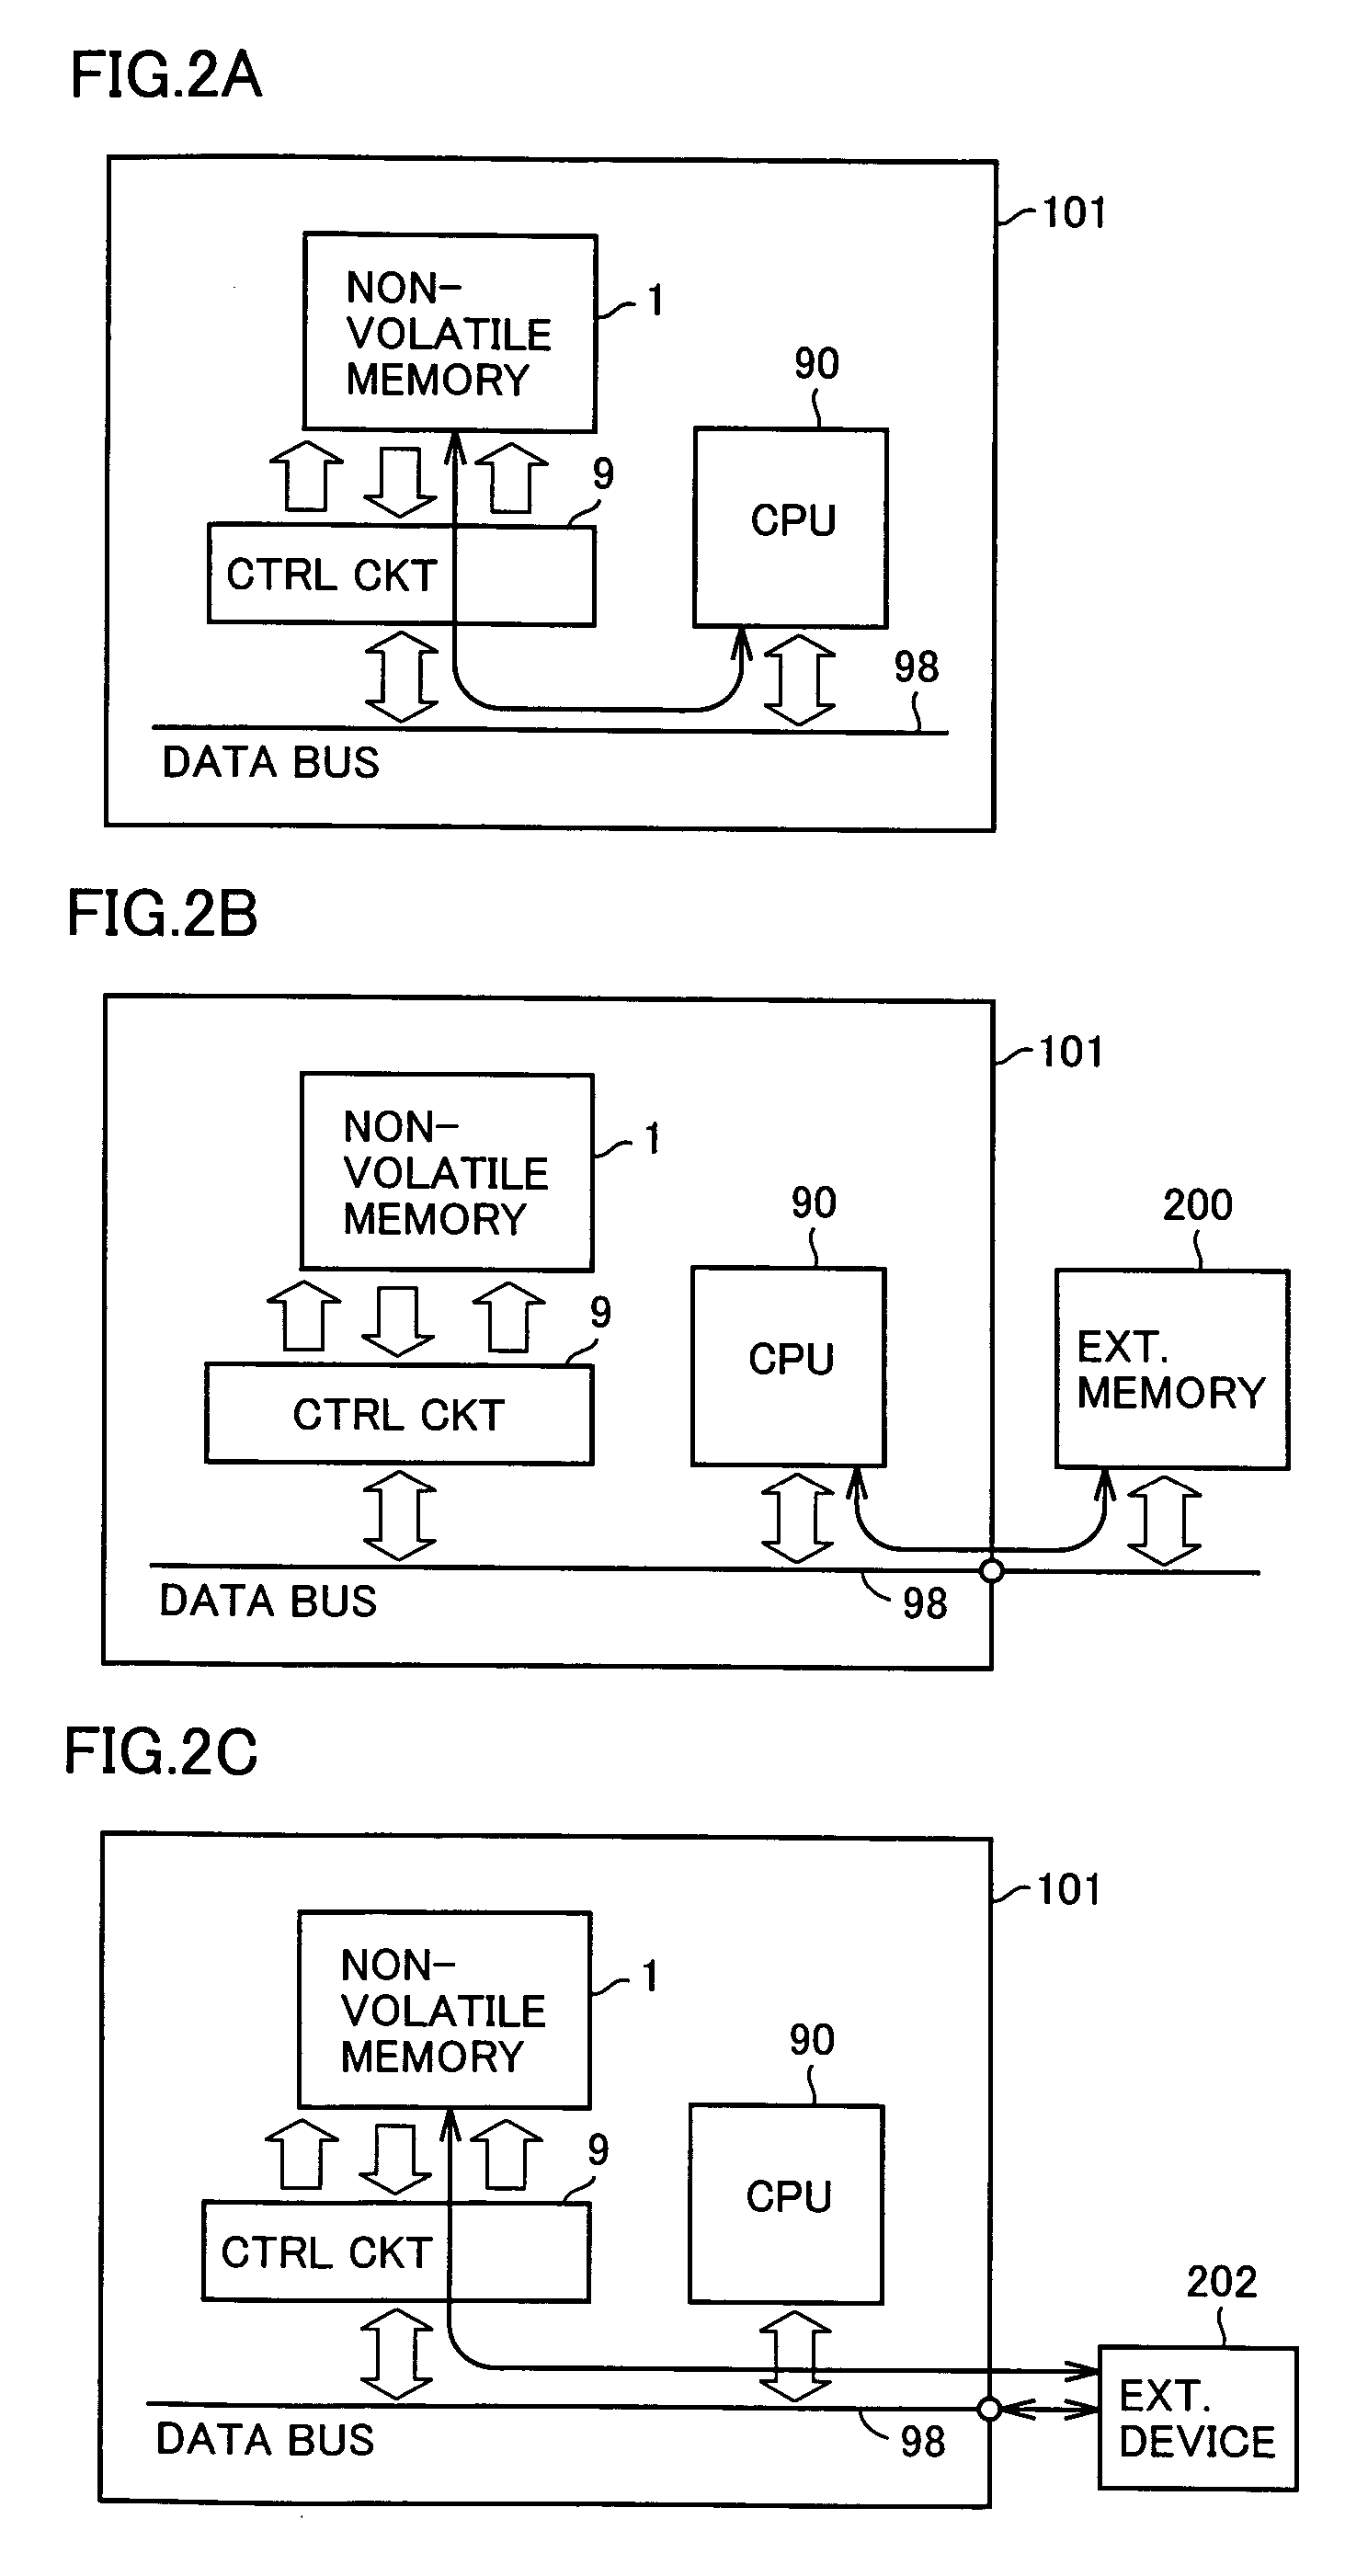 Data protection for non-volatile semiconductor memory using block protection flags